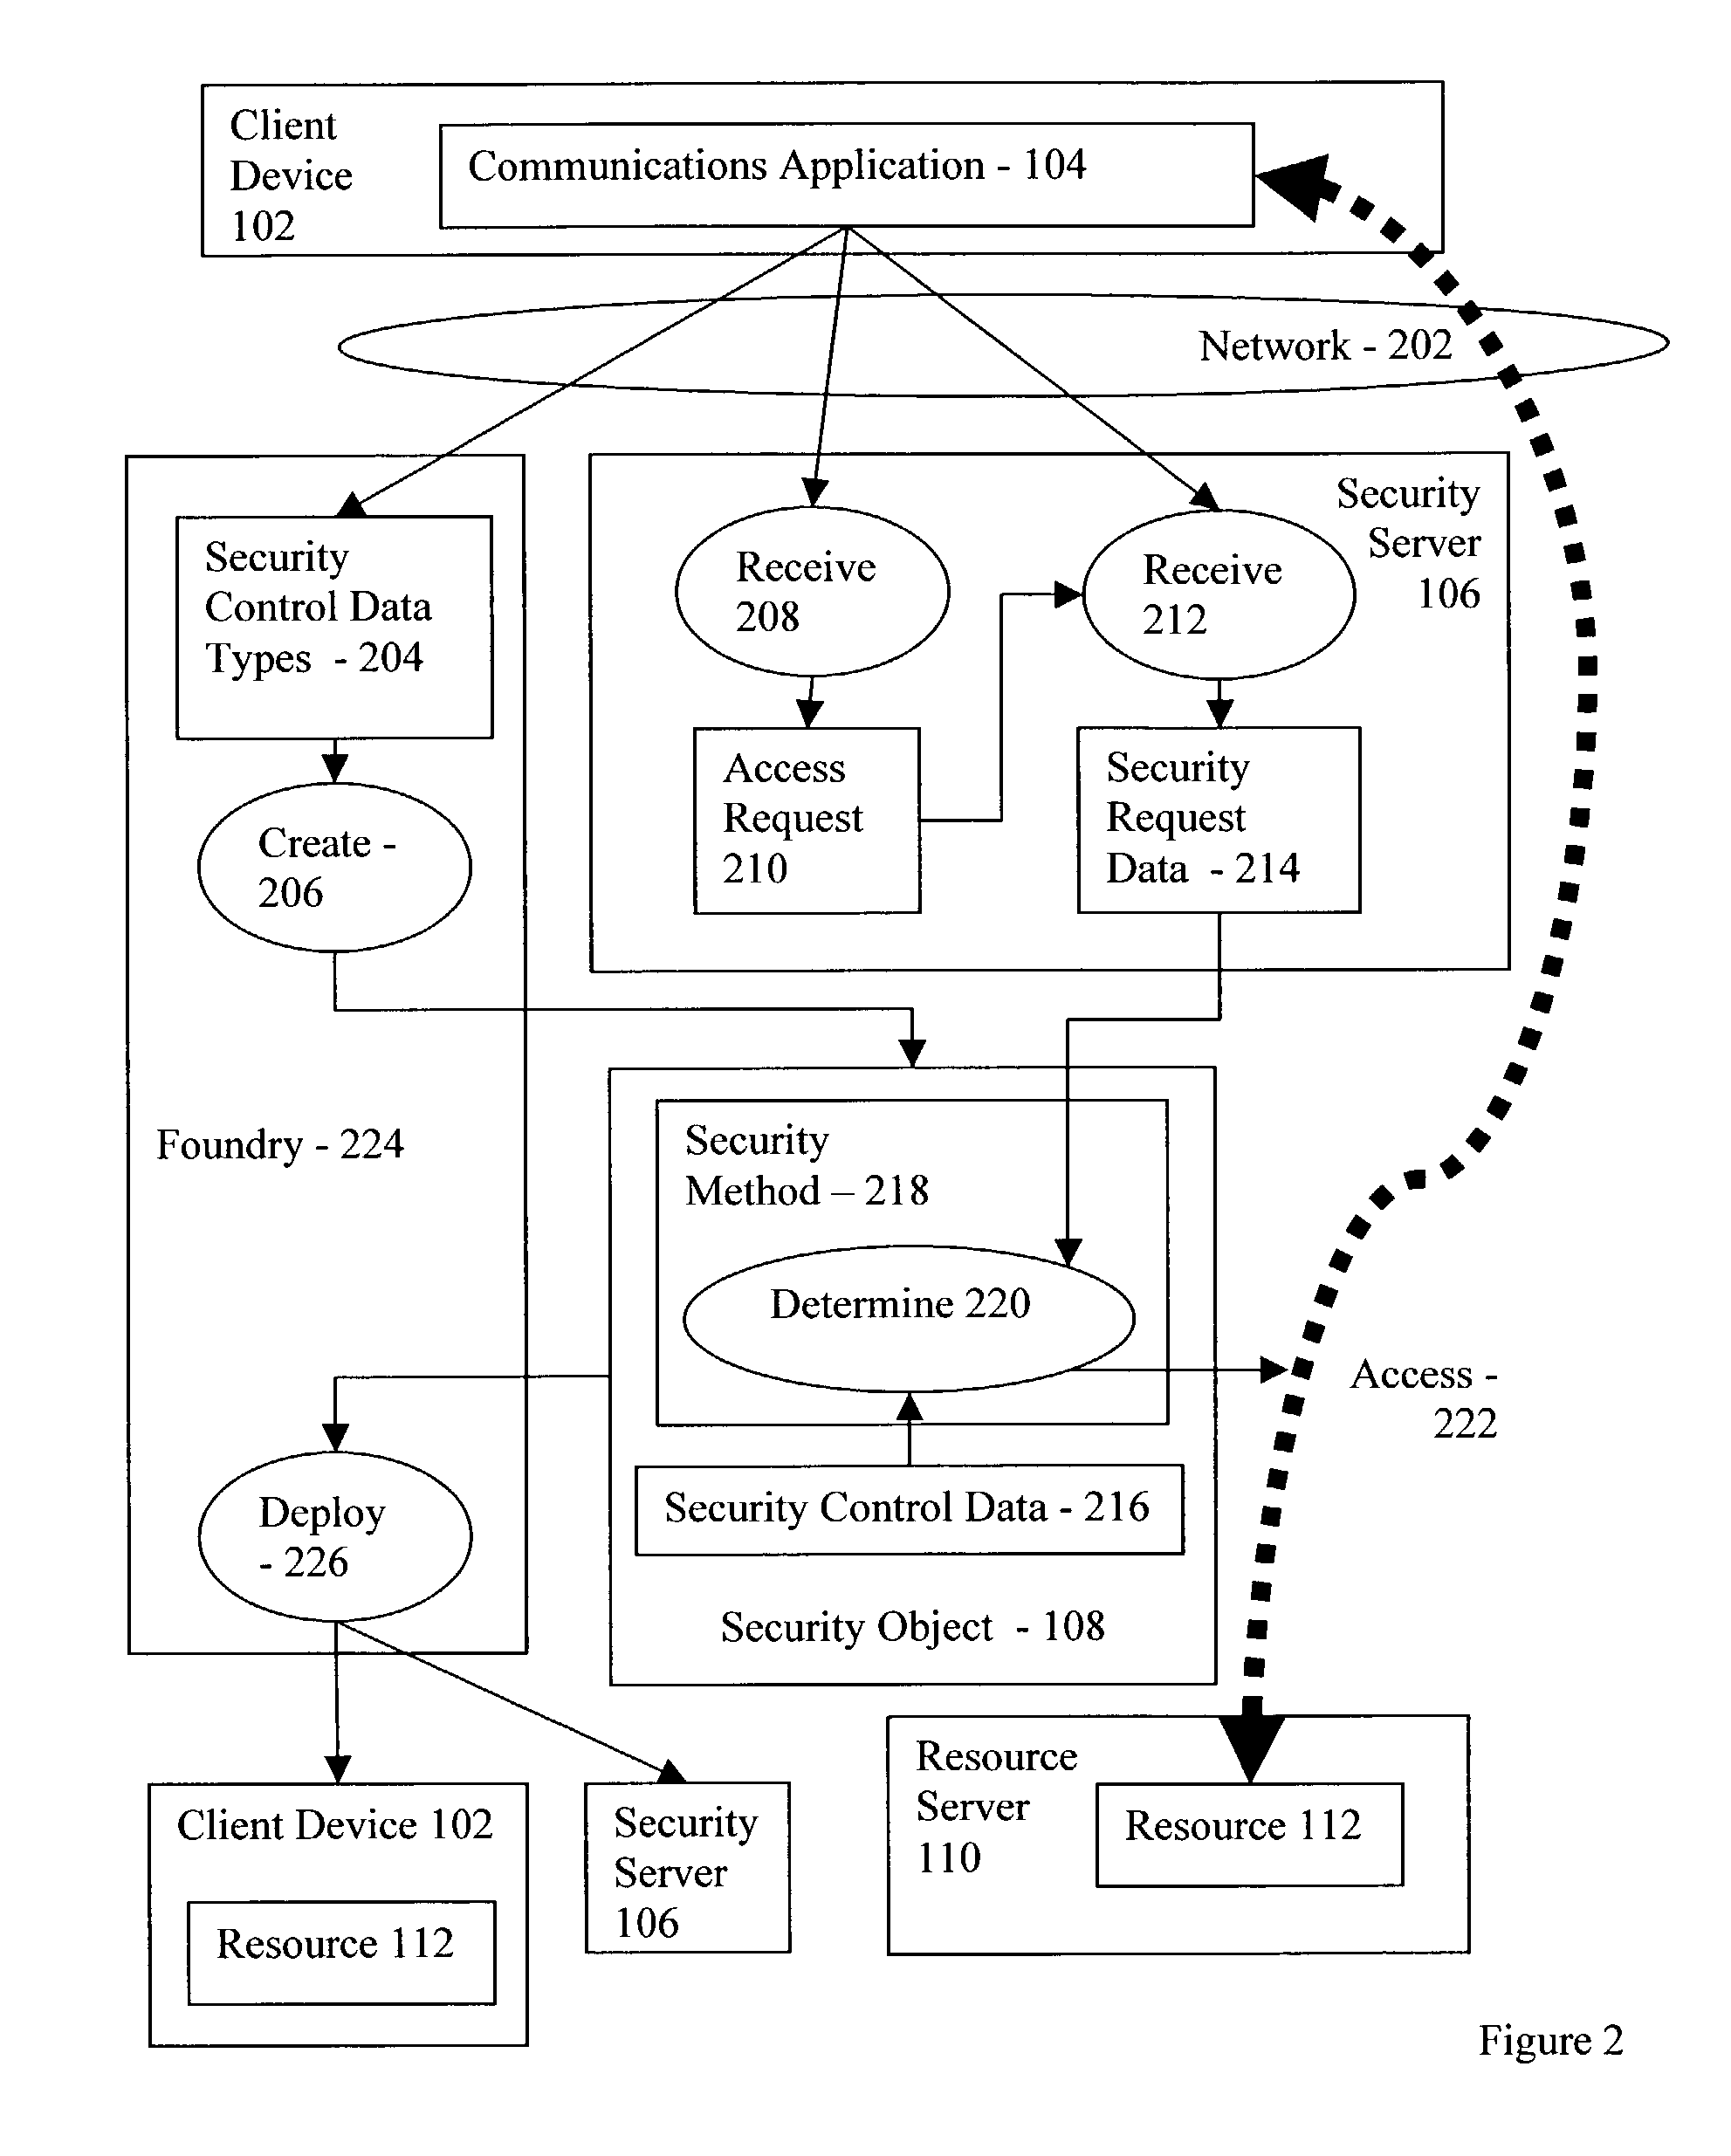 Management of security objects controlling access to resources